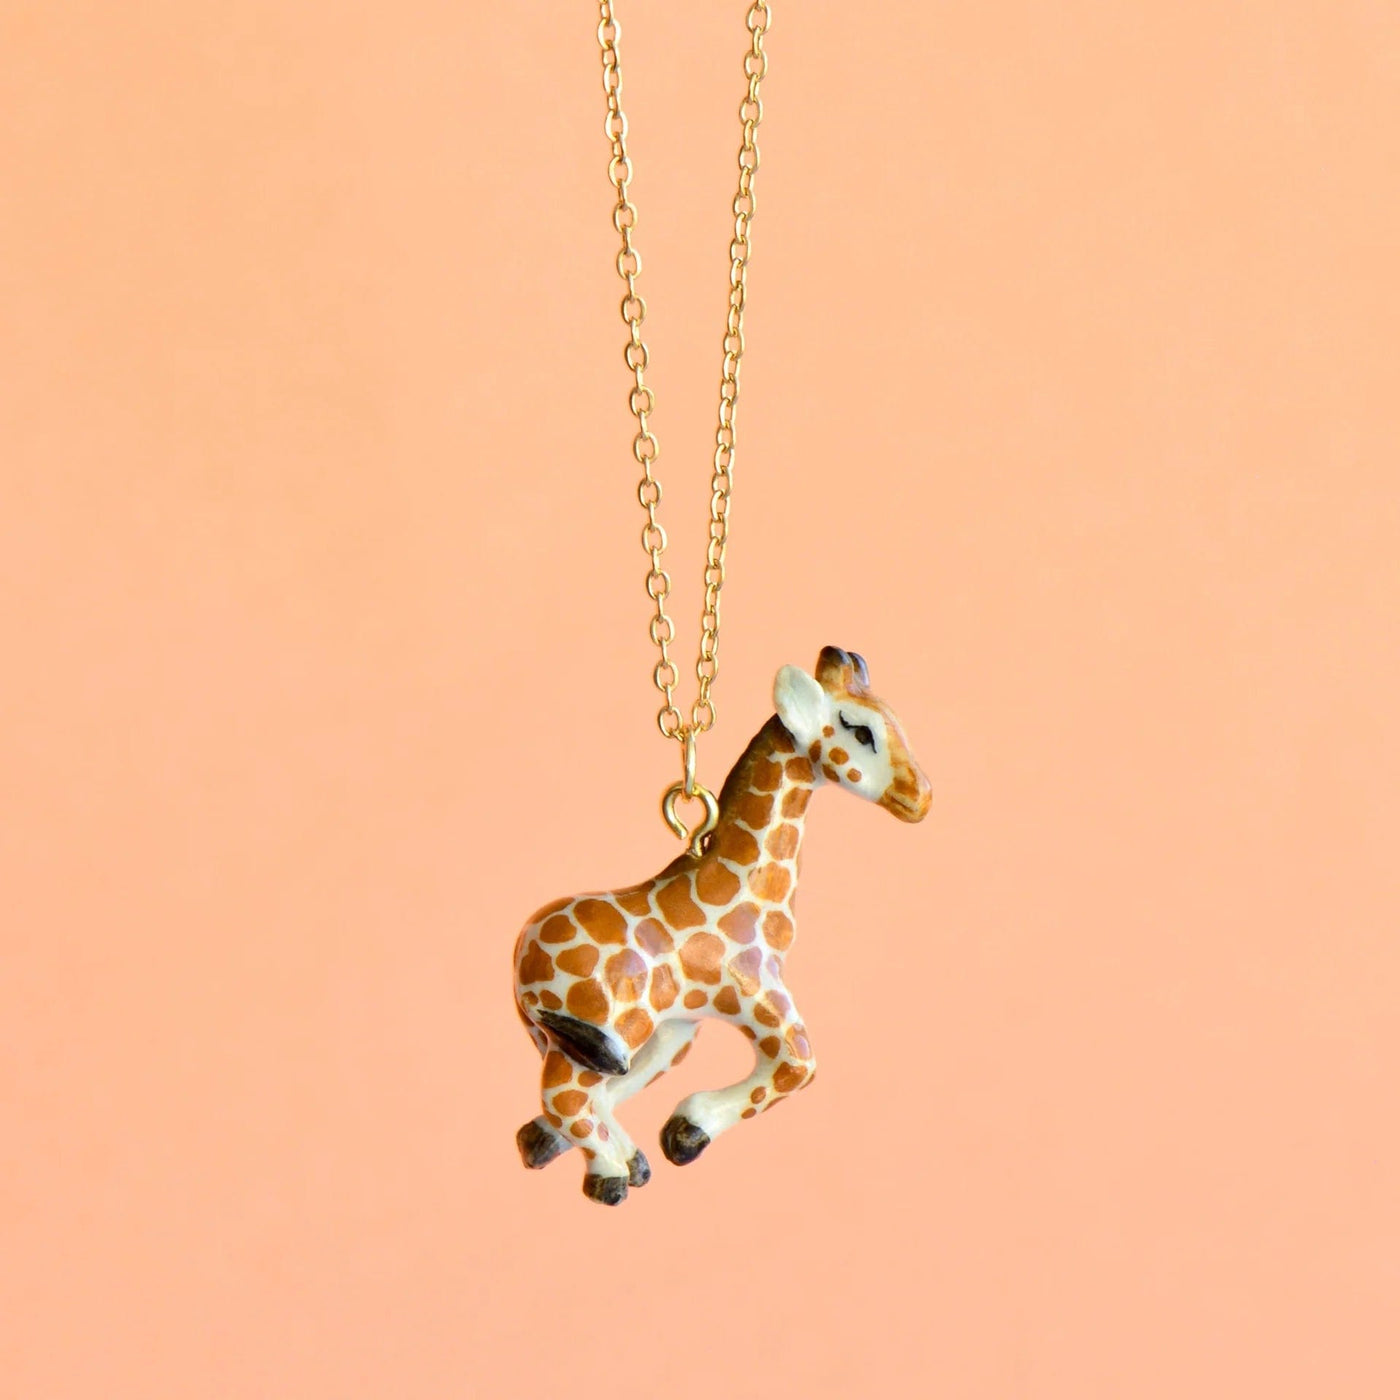 Storybook Porcelain Nature Necklace - available in a giraffe 